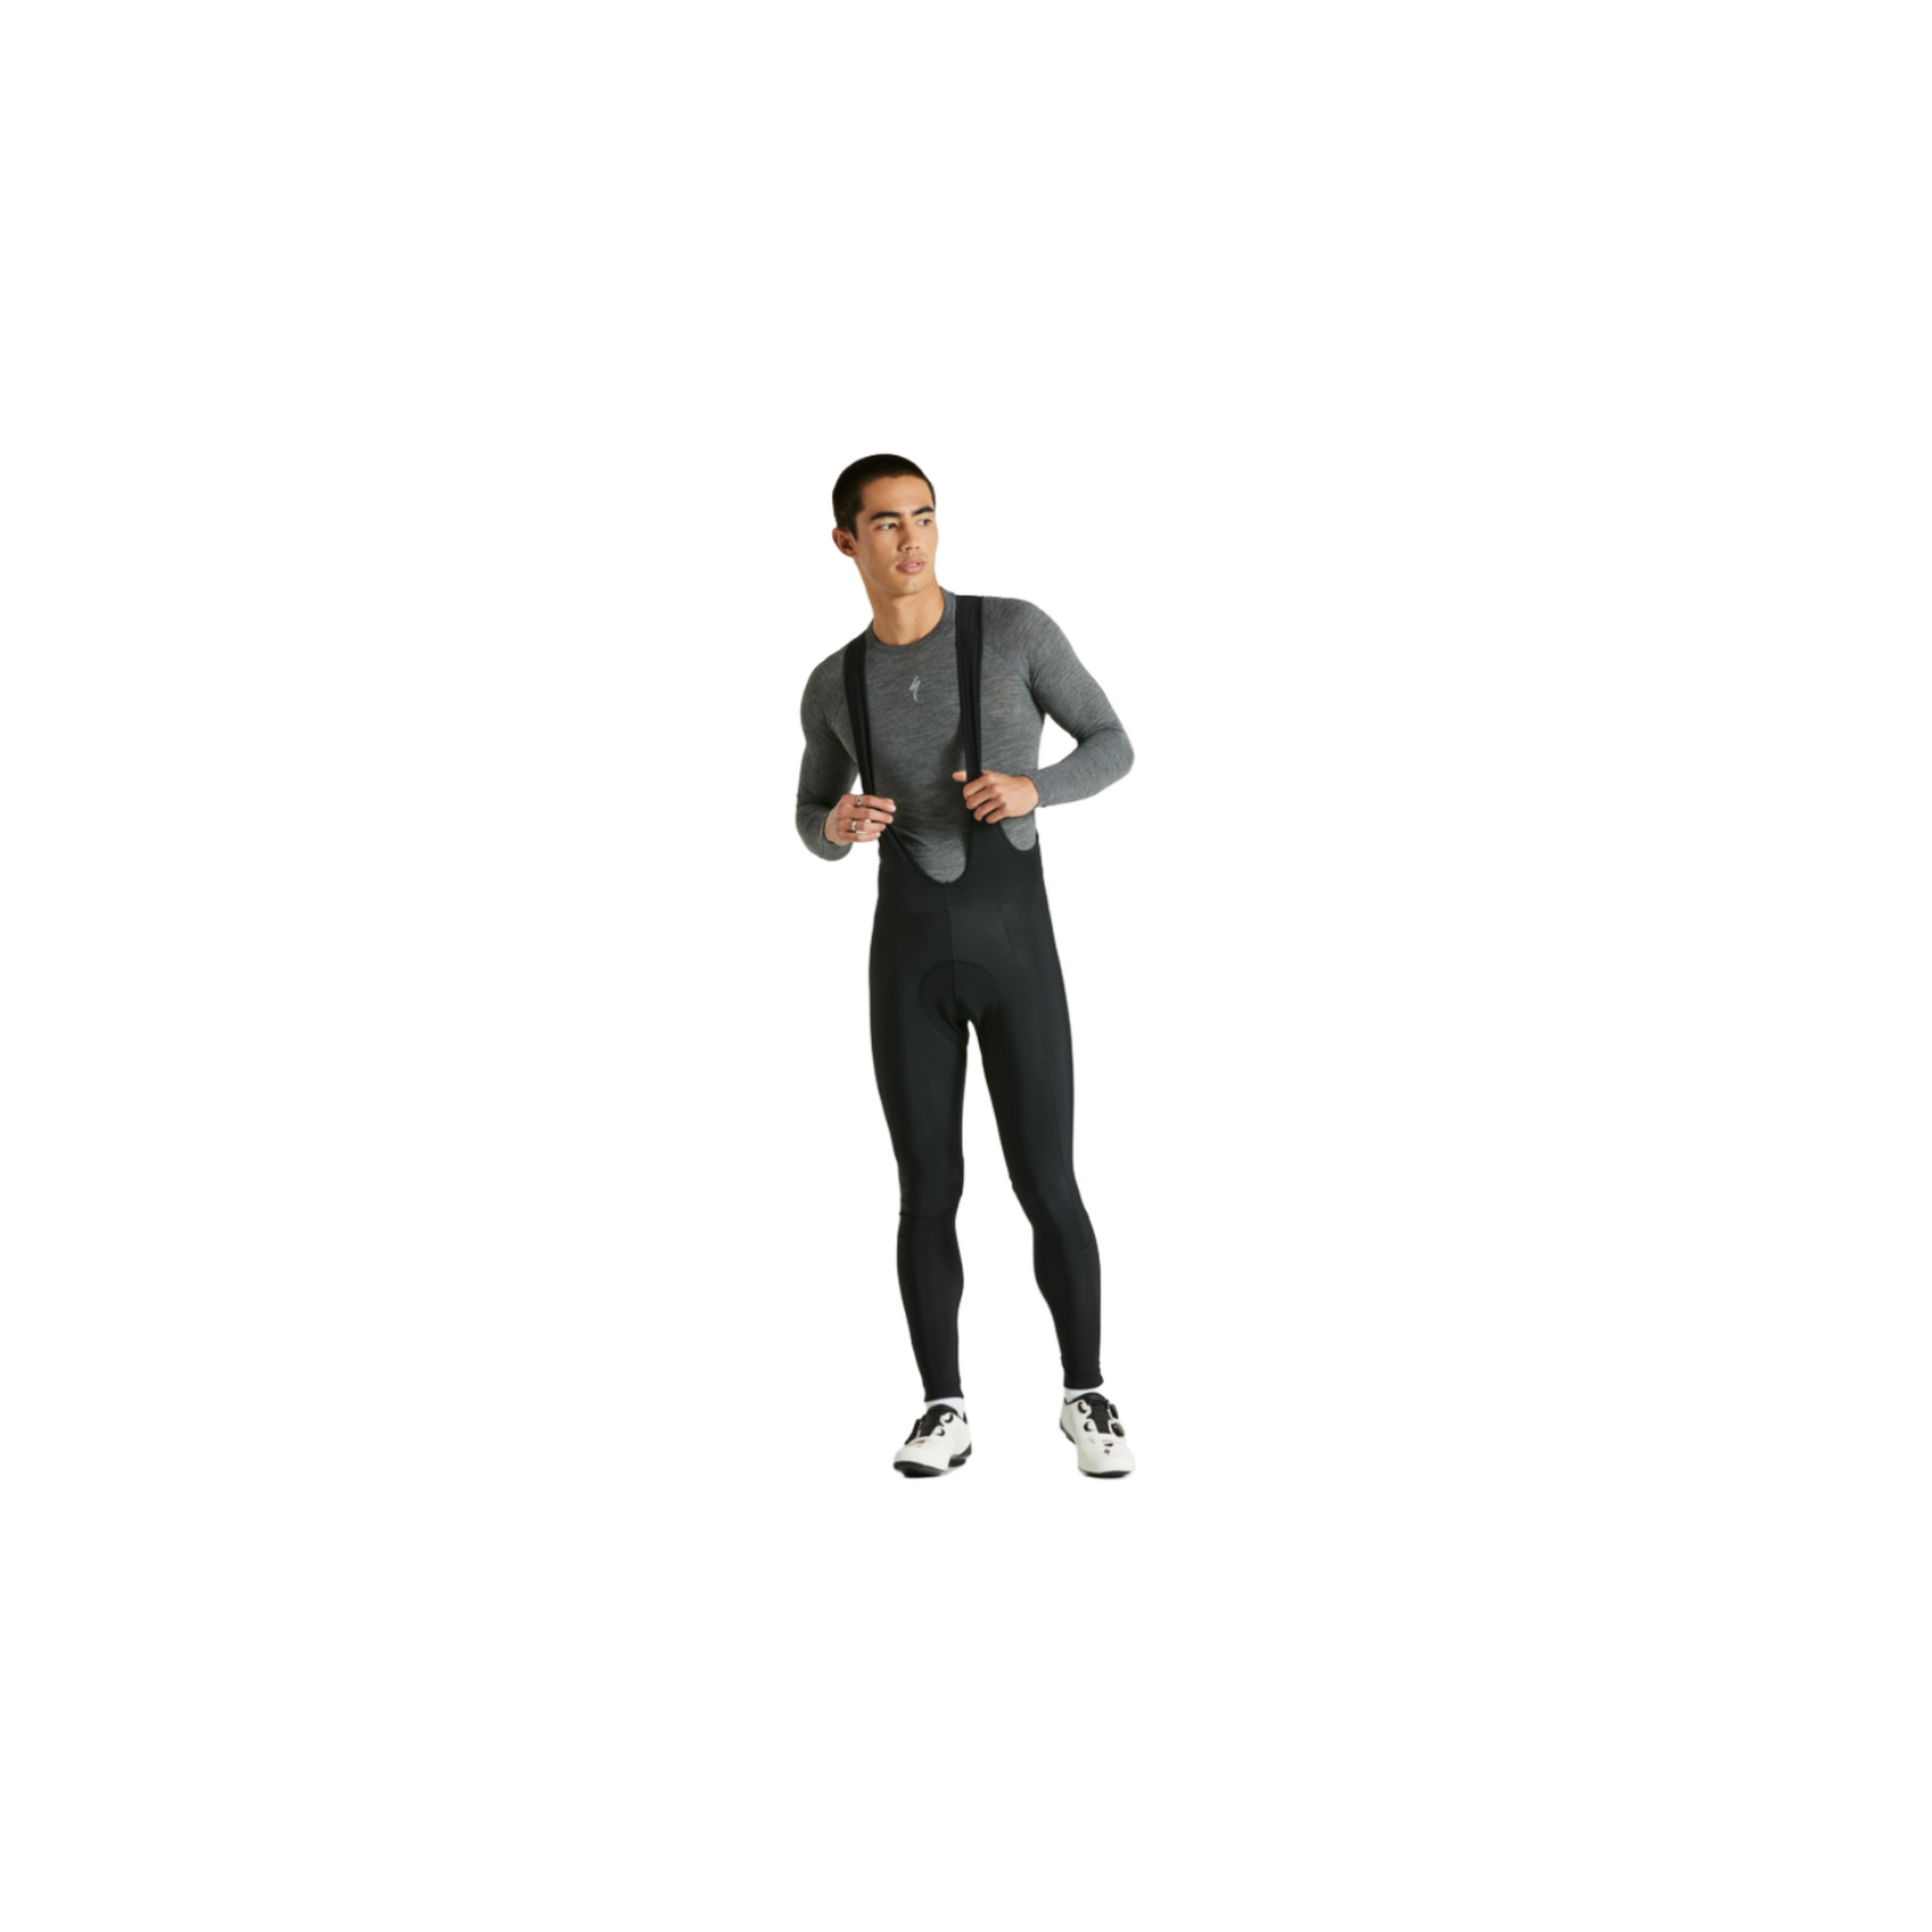 Men's RBX Comp Thermal Bib Tights | Complete Cyclist - Cold legs make for bad rides, and bad rides are no fun. Lucky for you, the RBX Comp Thermal Bib Tights keep your legs toasty on chilly days.And to top off the